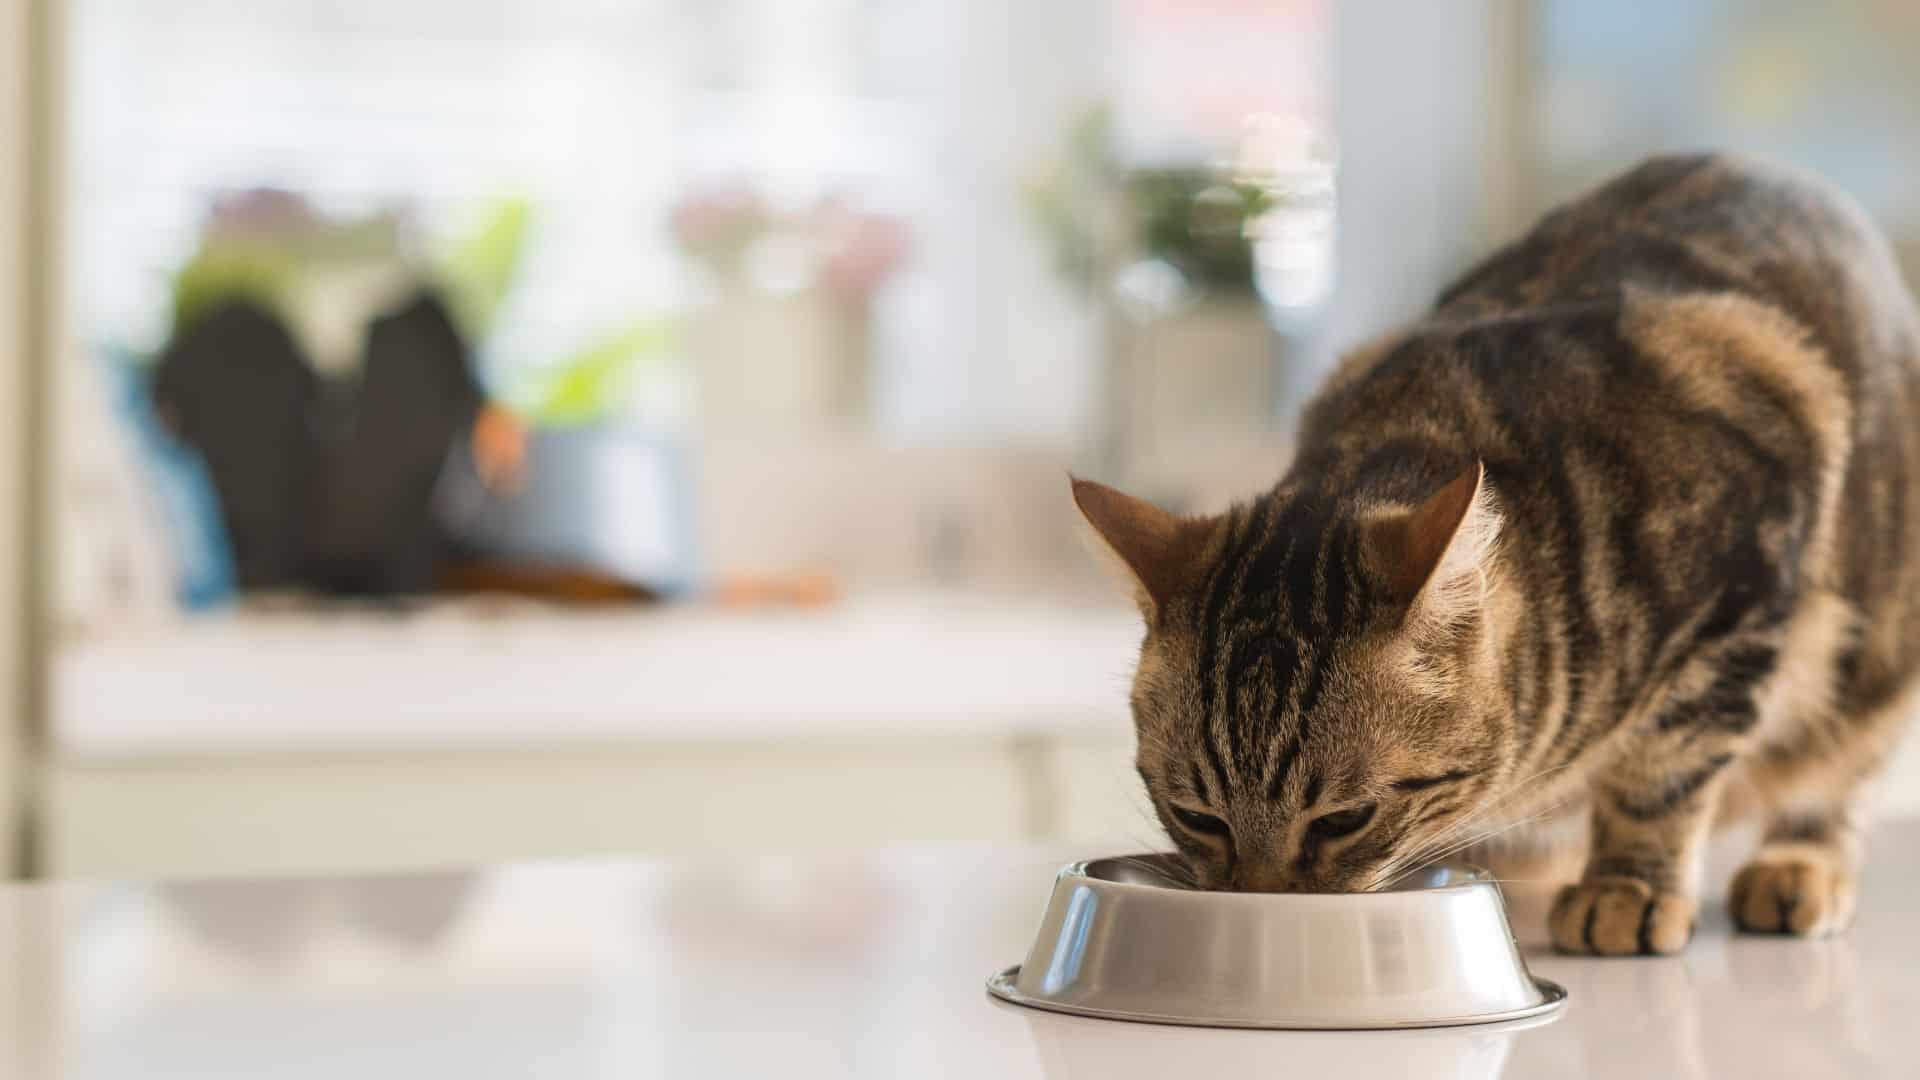 the cat eats food from the bowl